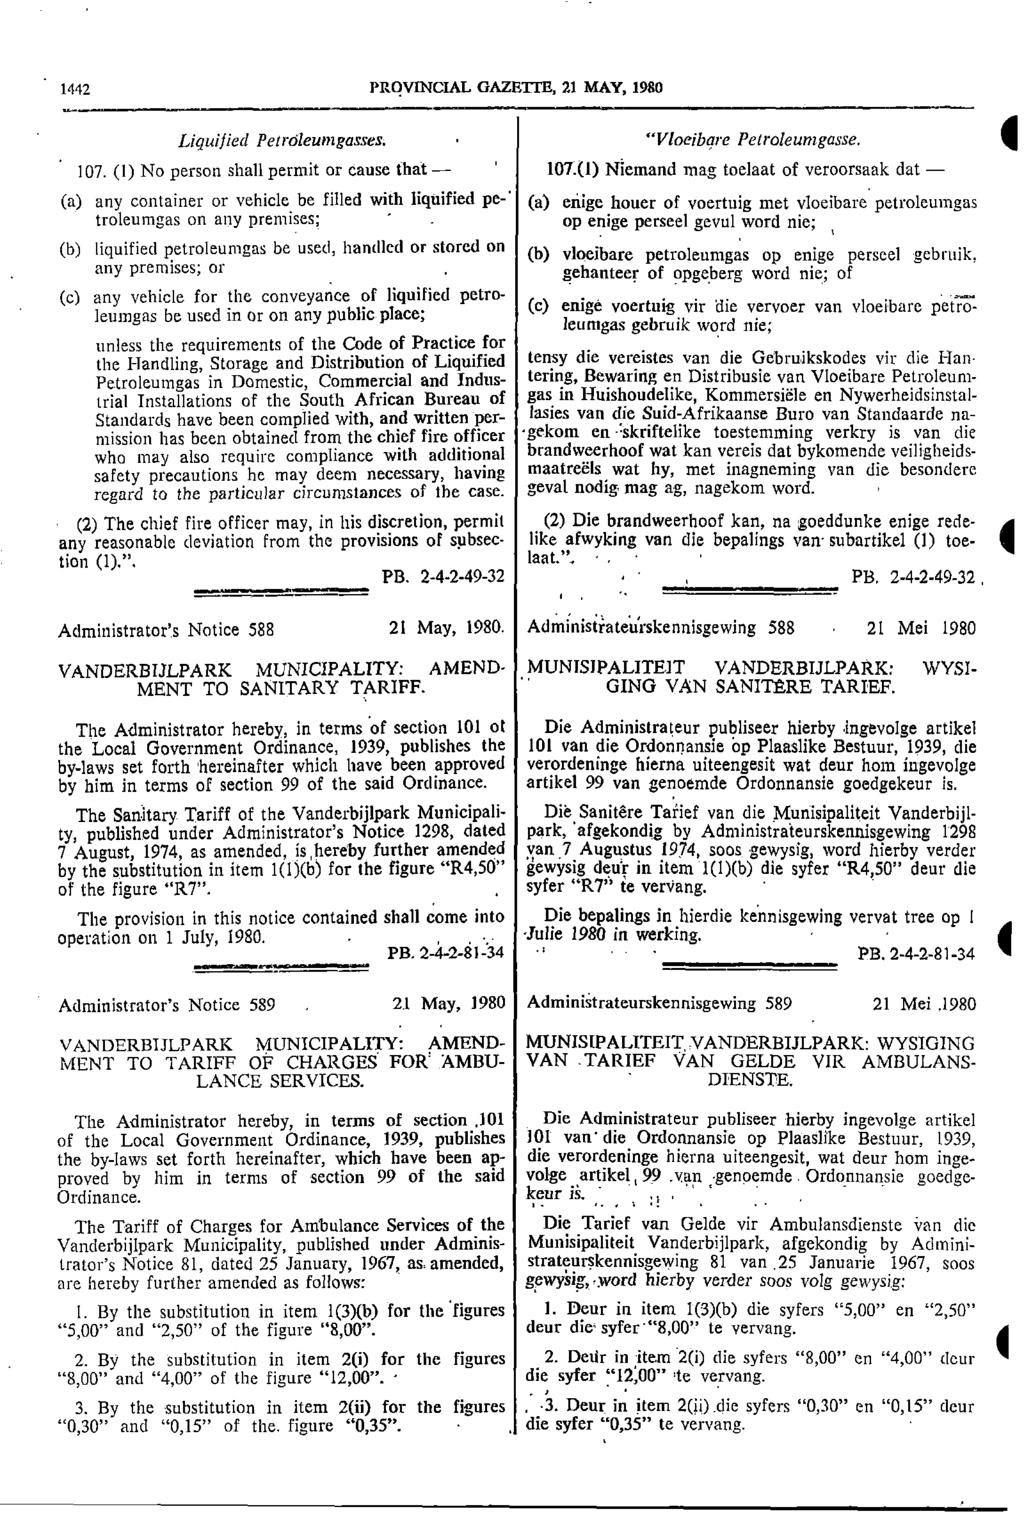 1442 PROVINCIAL GAZETTE 21 MAY 1980 Liquified Petroleumgasses "Vloeibare Petroleunzgasse 107 (I) No person shall permit or cause that 107(1) Niemand mag toelaat of veroorsaak dat (a) any container or